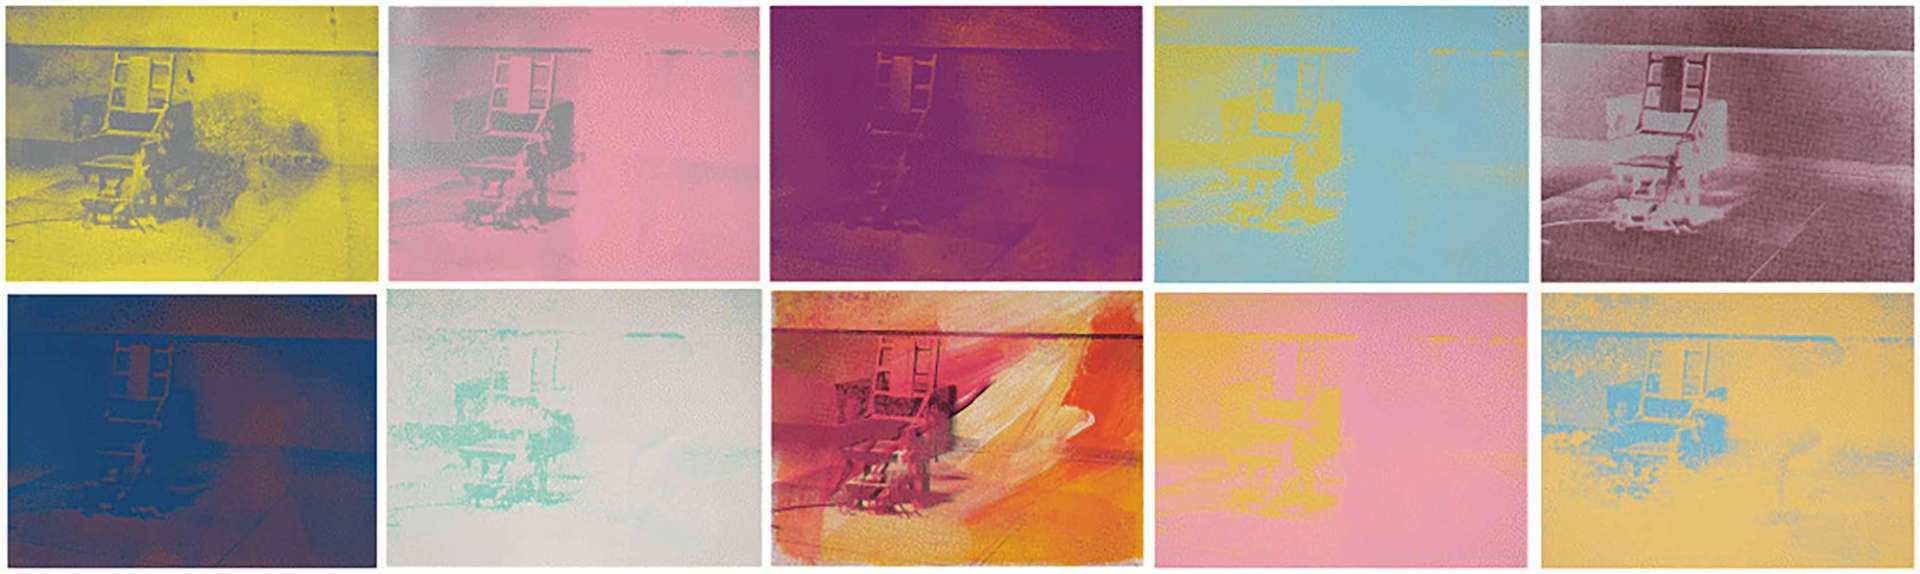 A complete set of Andy Warhol's electric chairs, depicting the death instrument in a variety of bright colours.